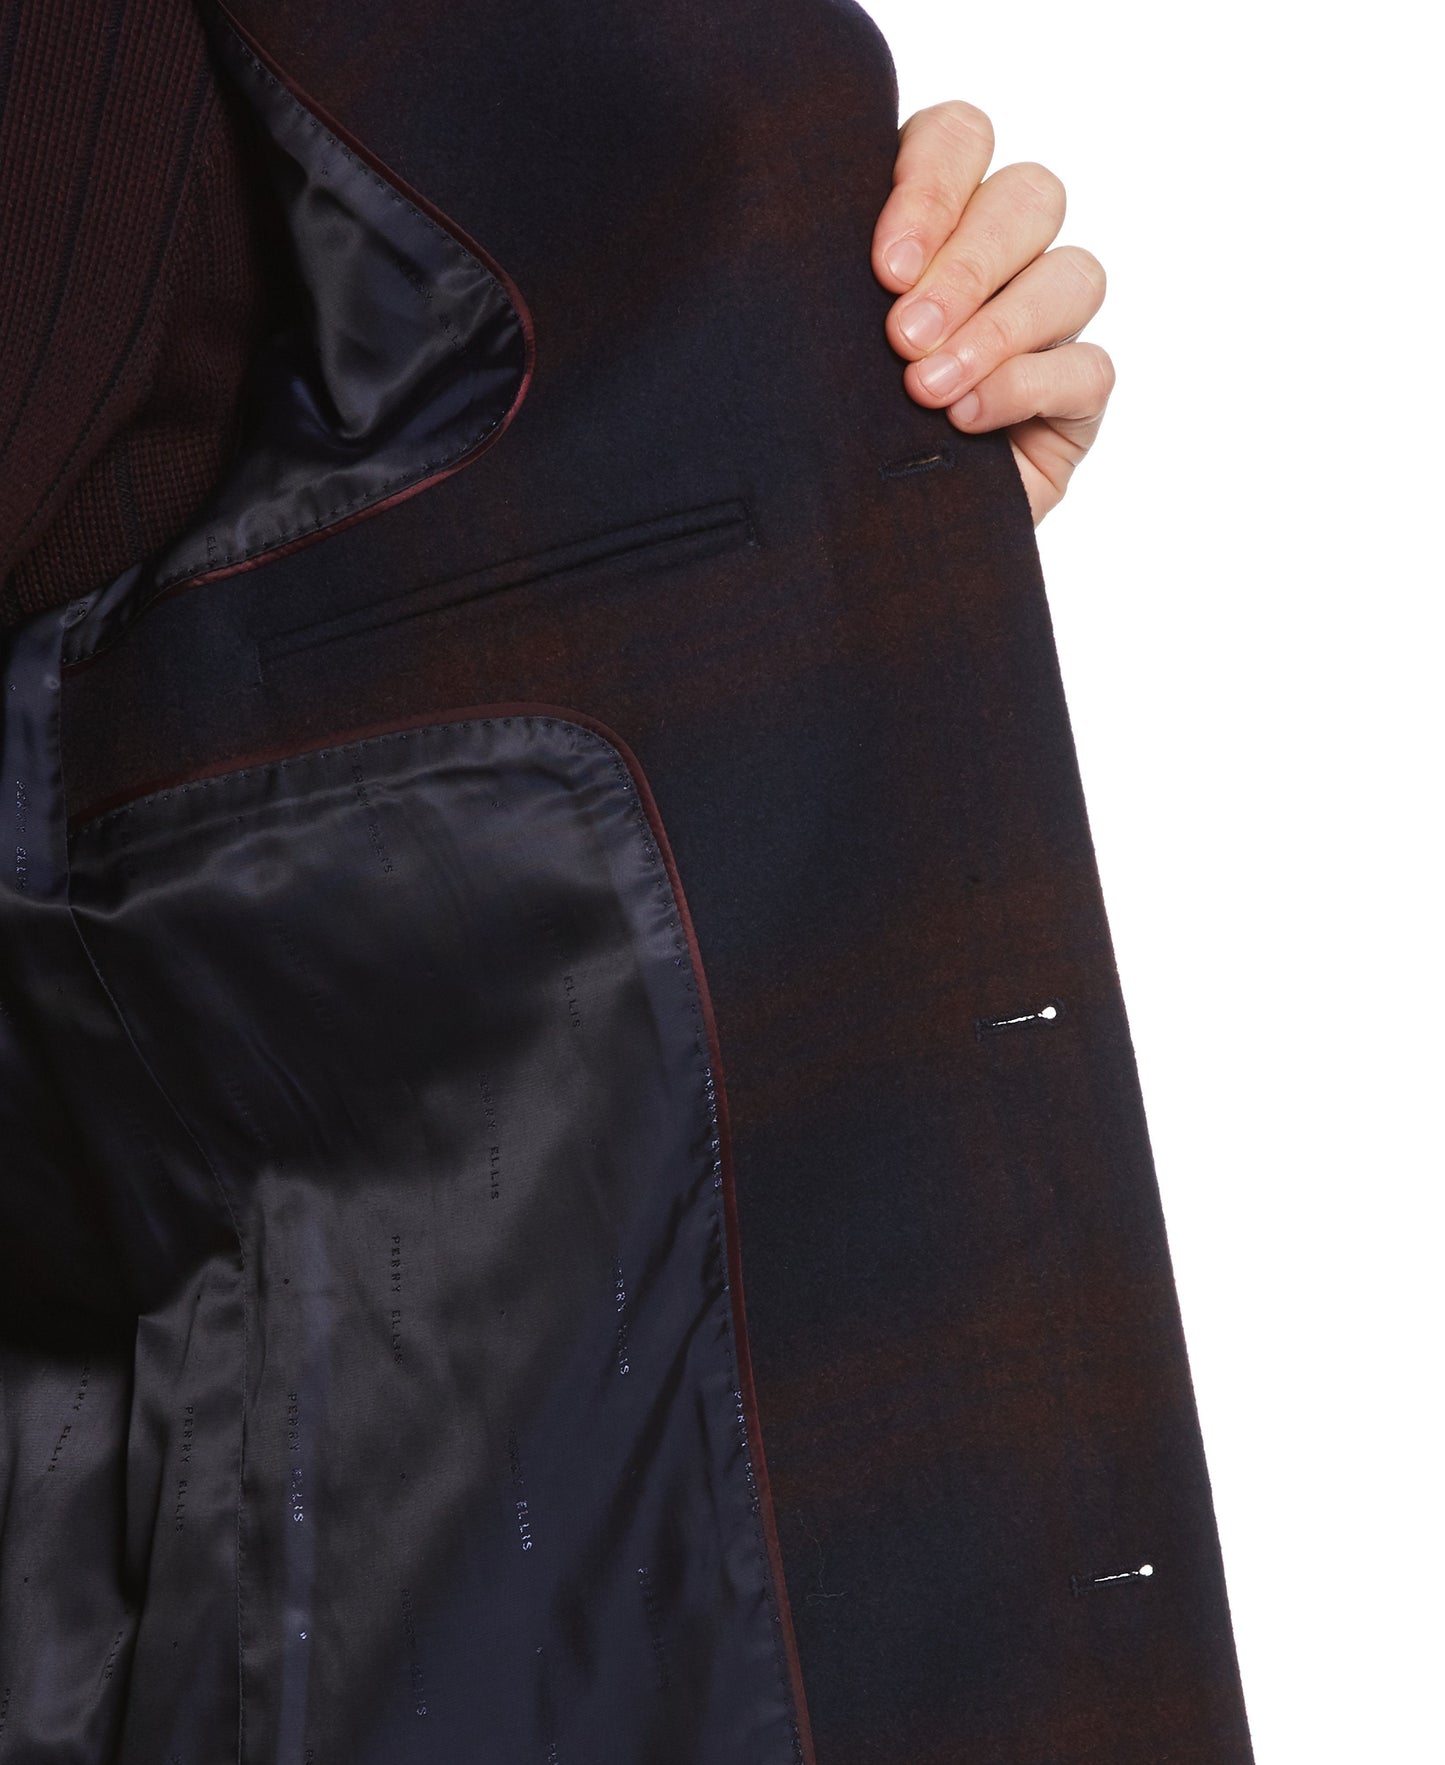 Large Ombre Plaid Wool Topcoat